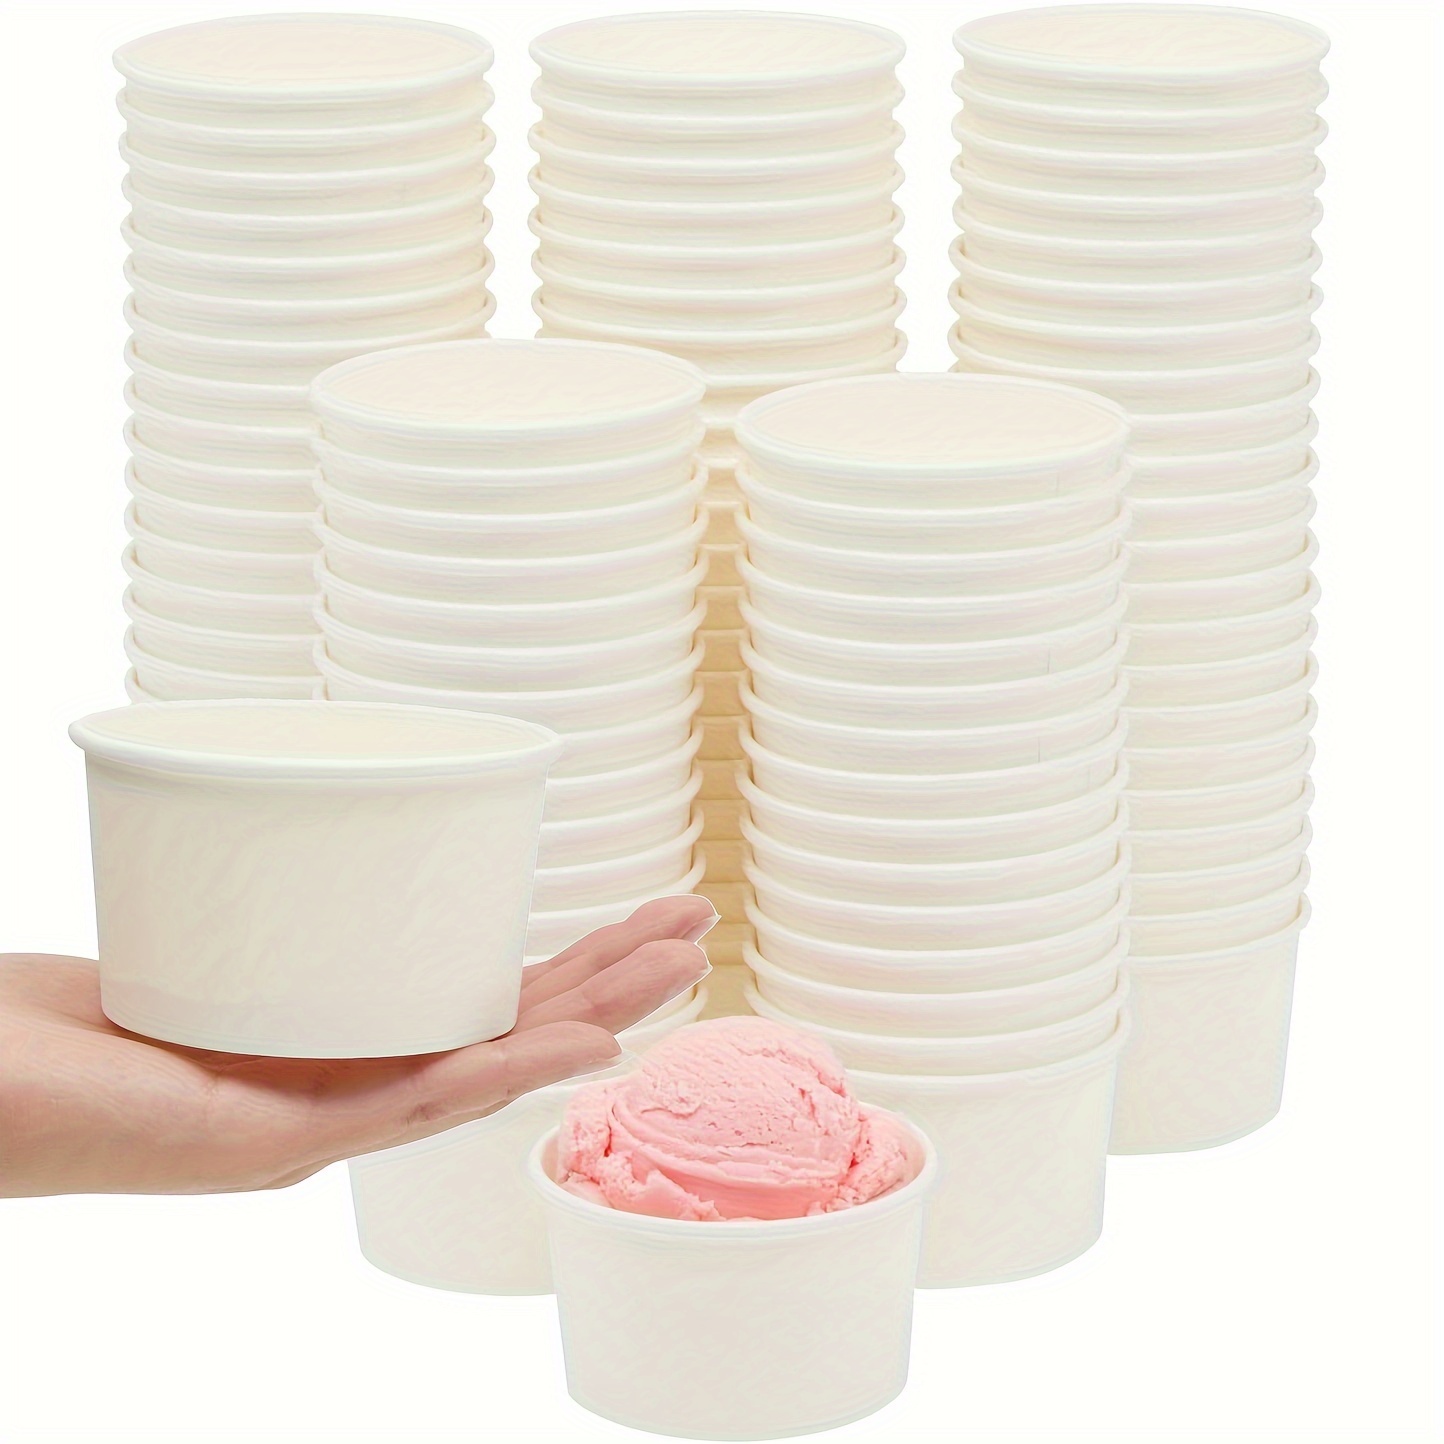 

10/50pcs Bowls, 7 Oz White Paper Ice Cream Cups, Disposable Dessert Bowls, For Hot Or Cold Food, Cups For Sundae, Yogurt, Soup, Party Supplies, Kitchen Supplies